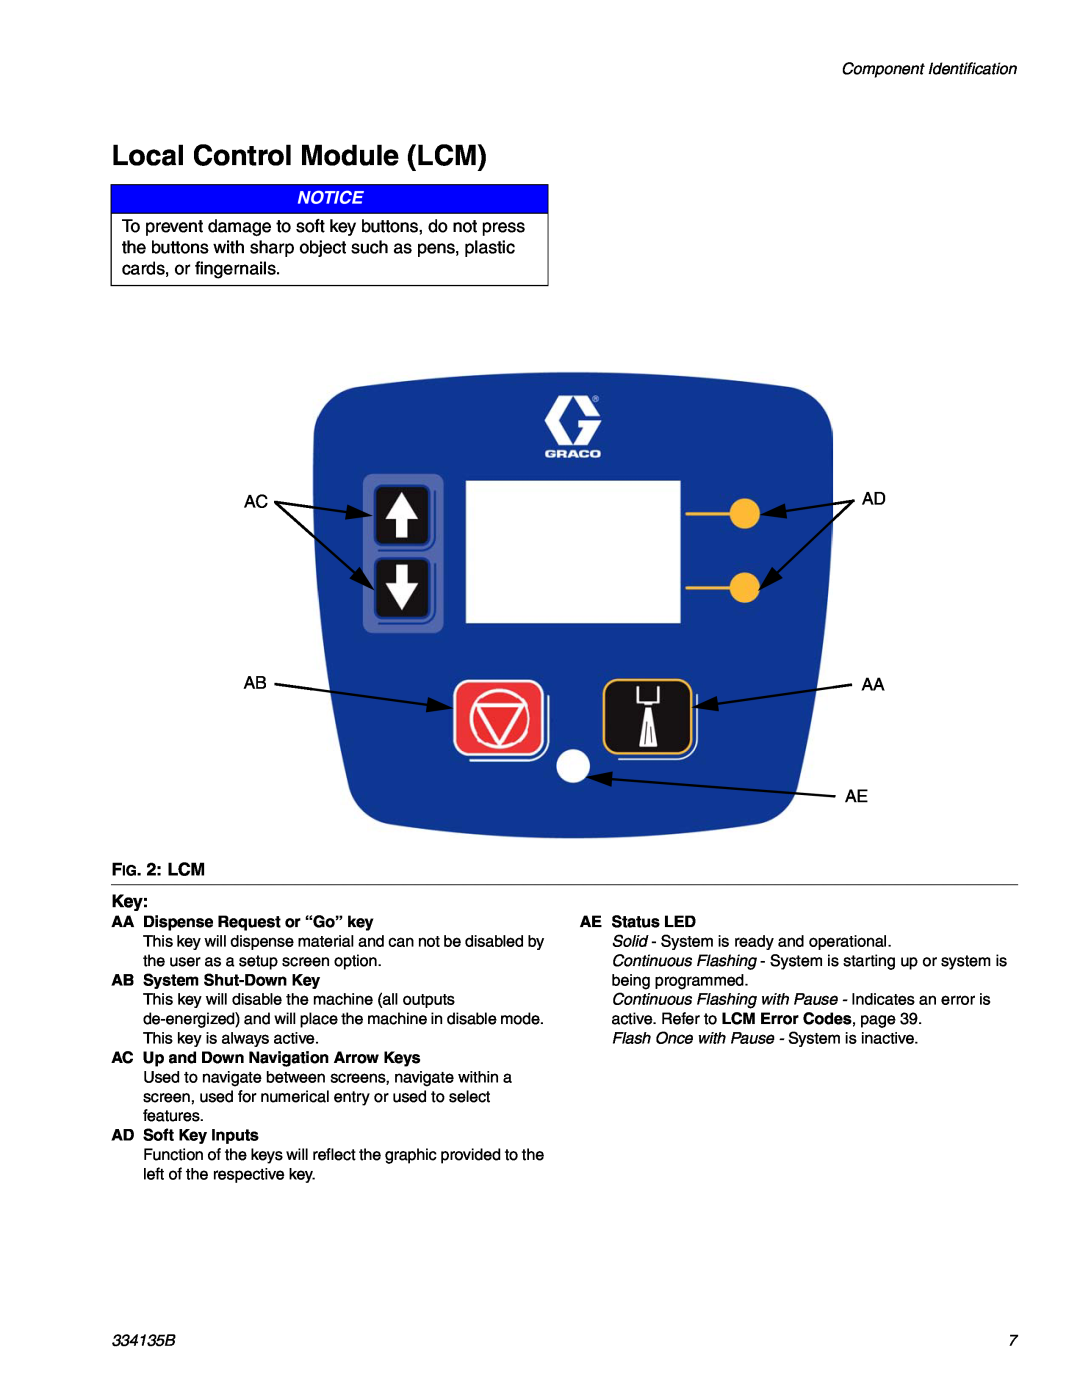 Graco 334135B Local Control Module LCM, LCM Key, Component Identification, Flash Once with Pause - System is inactive 